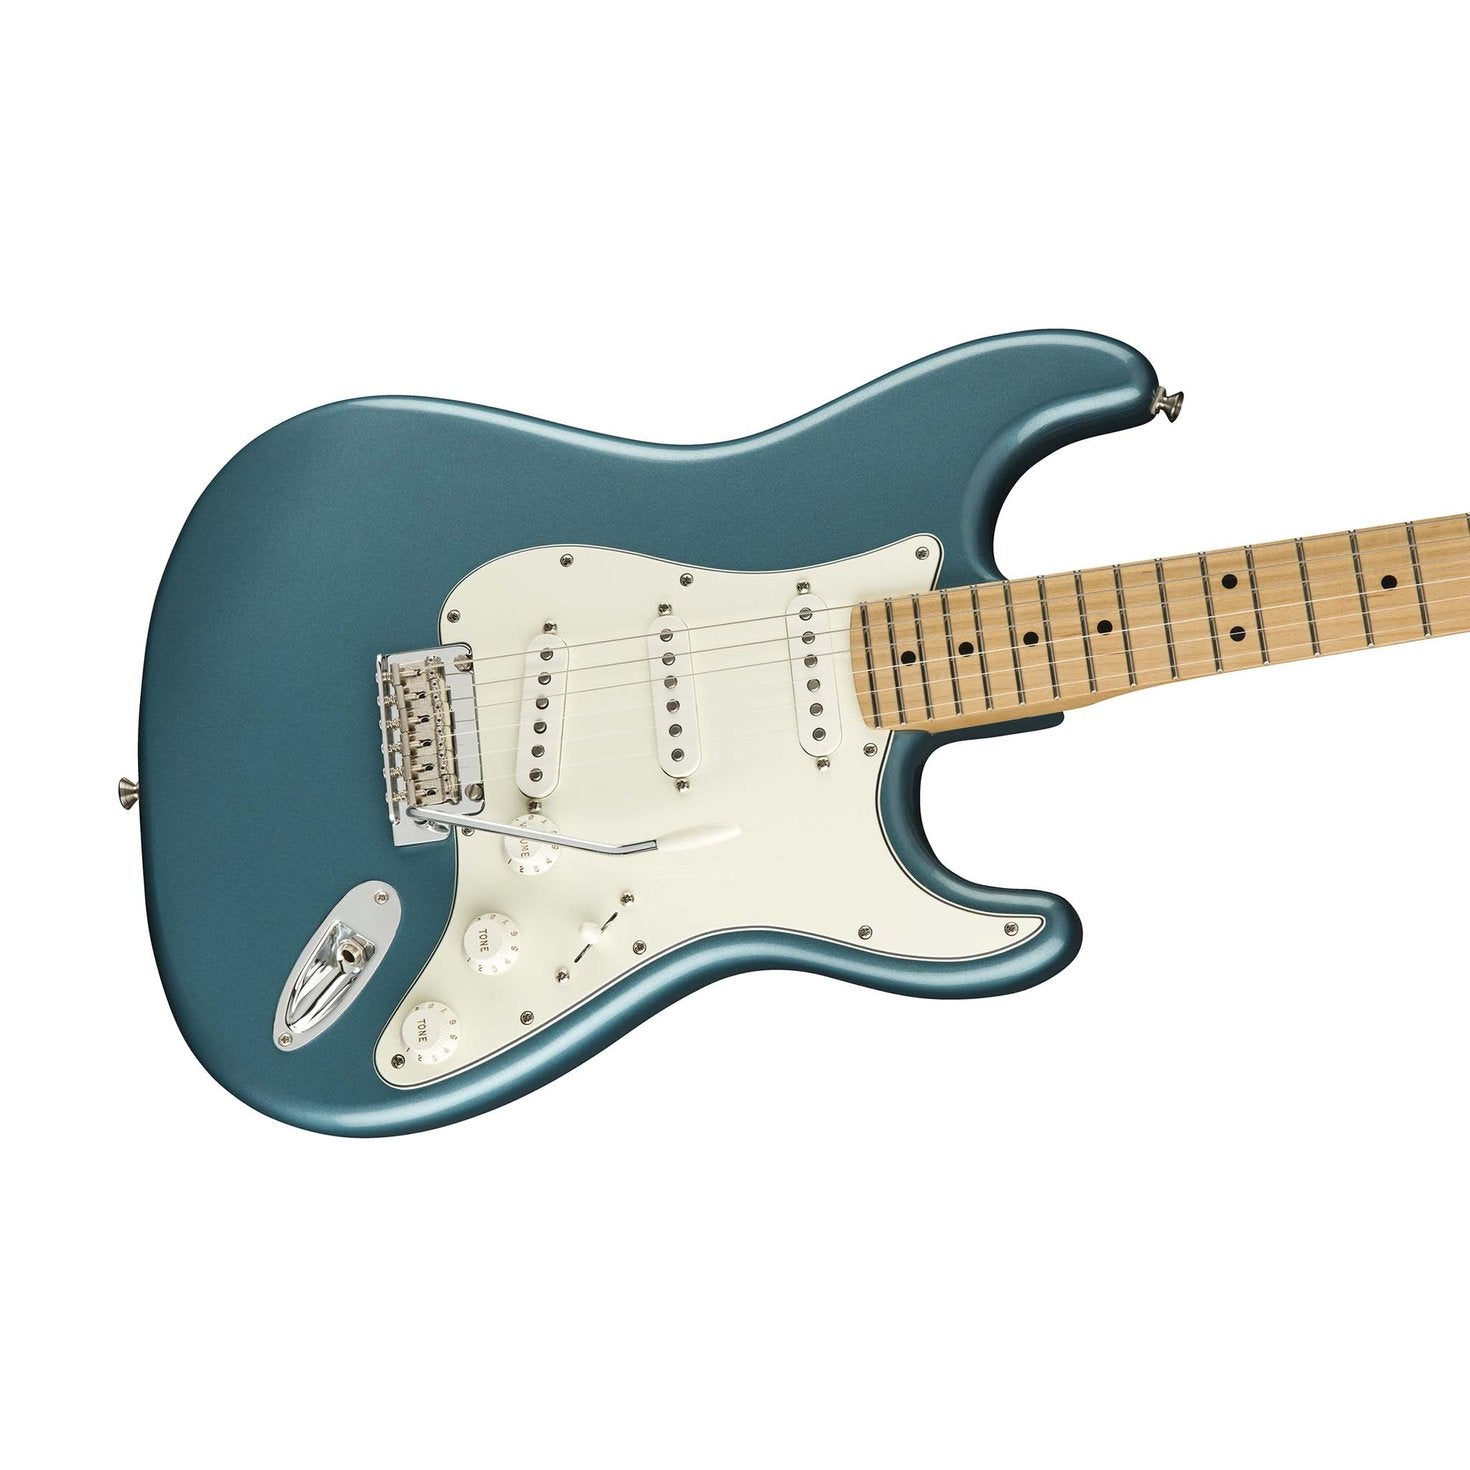 Fender Player Stratocaster Electric Guitar, Maple FB, Tidepool, FENDER, ELECTRIC GUITAR, fender-eletric-guitar-f03-014-4502-513, ZOSO MUSIC SDN BHD